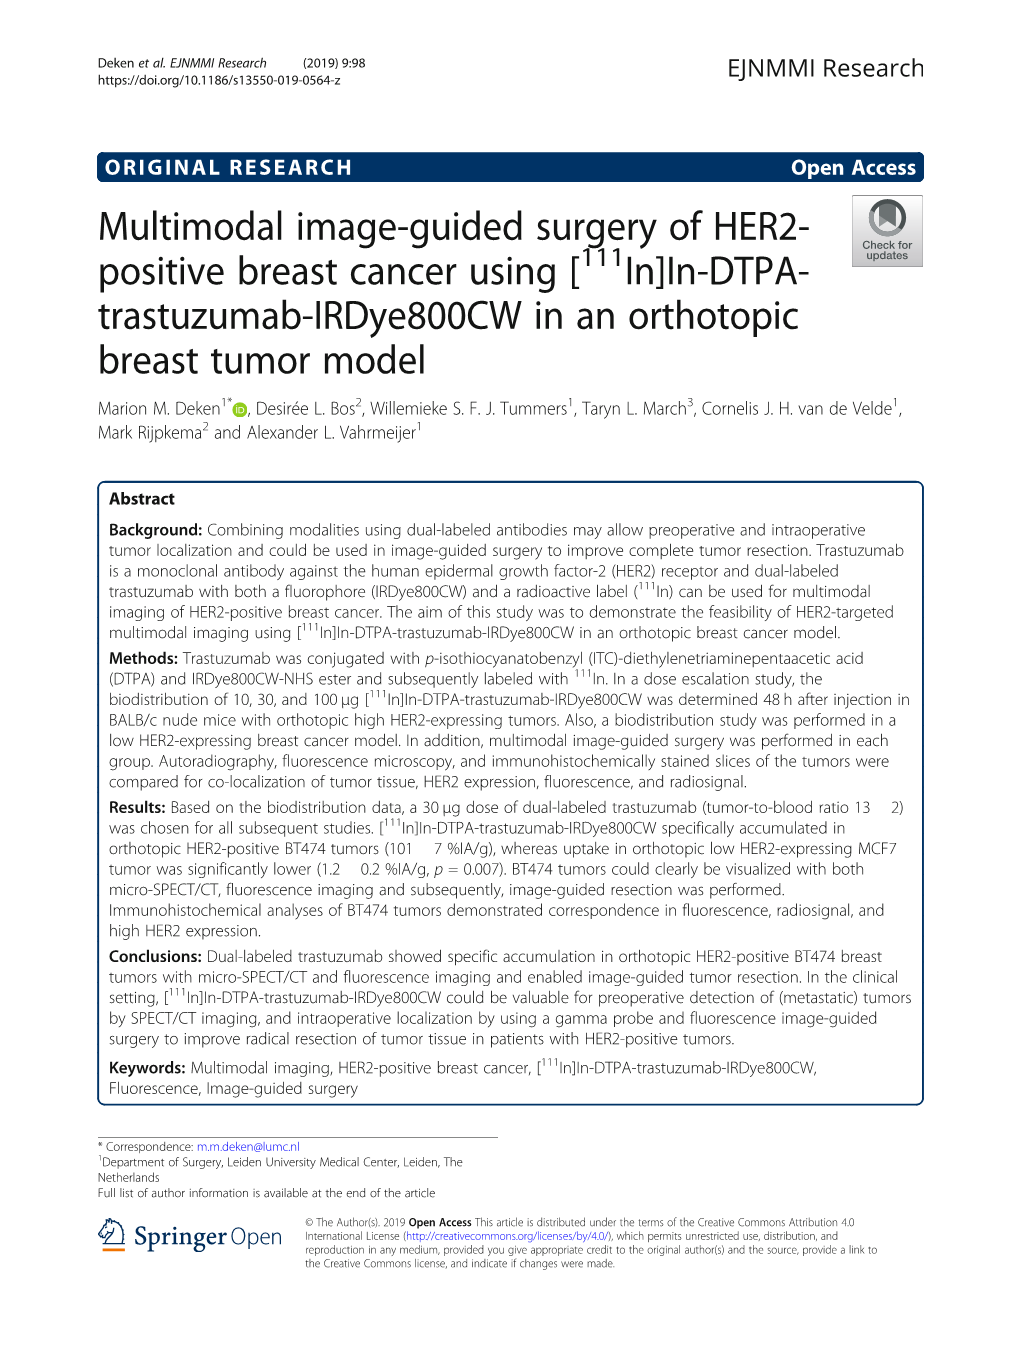 Multimodal Image-Guided Surgery of HER2-Positive Breast Cancer Using [111In]In-DTPA-Trastuzumab-Irdye800cw in an Orthotopic Brea